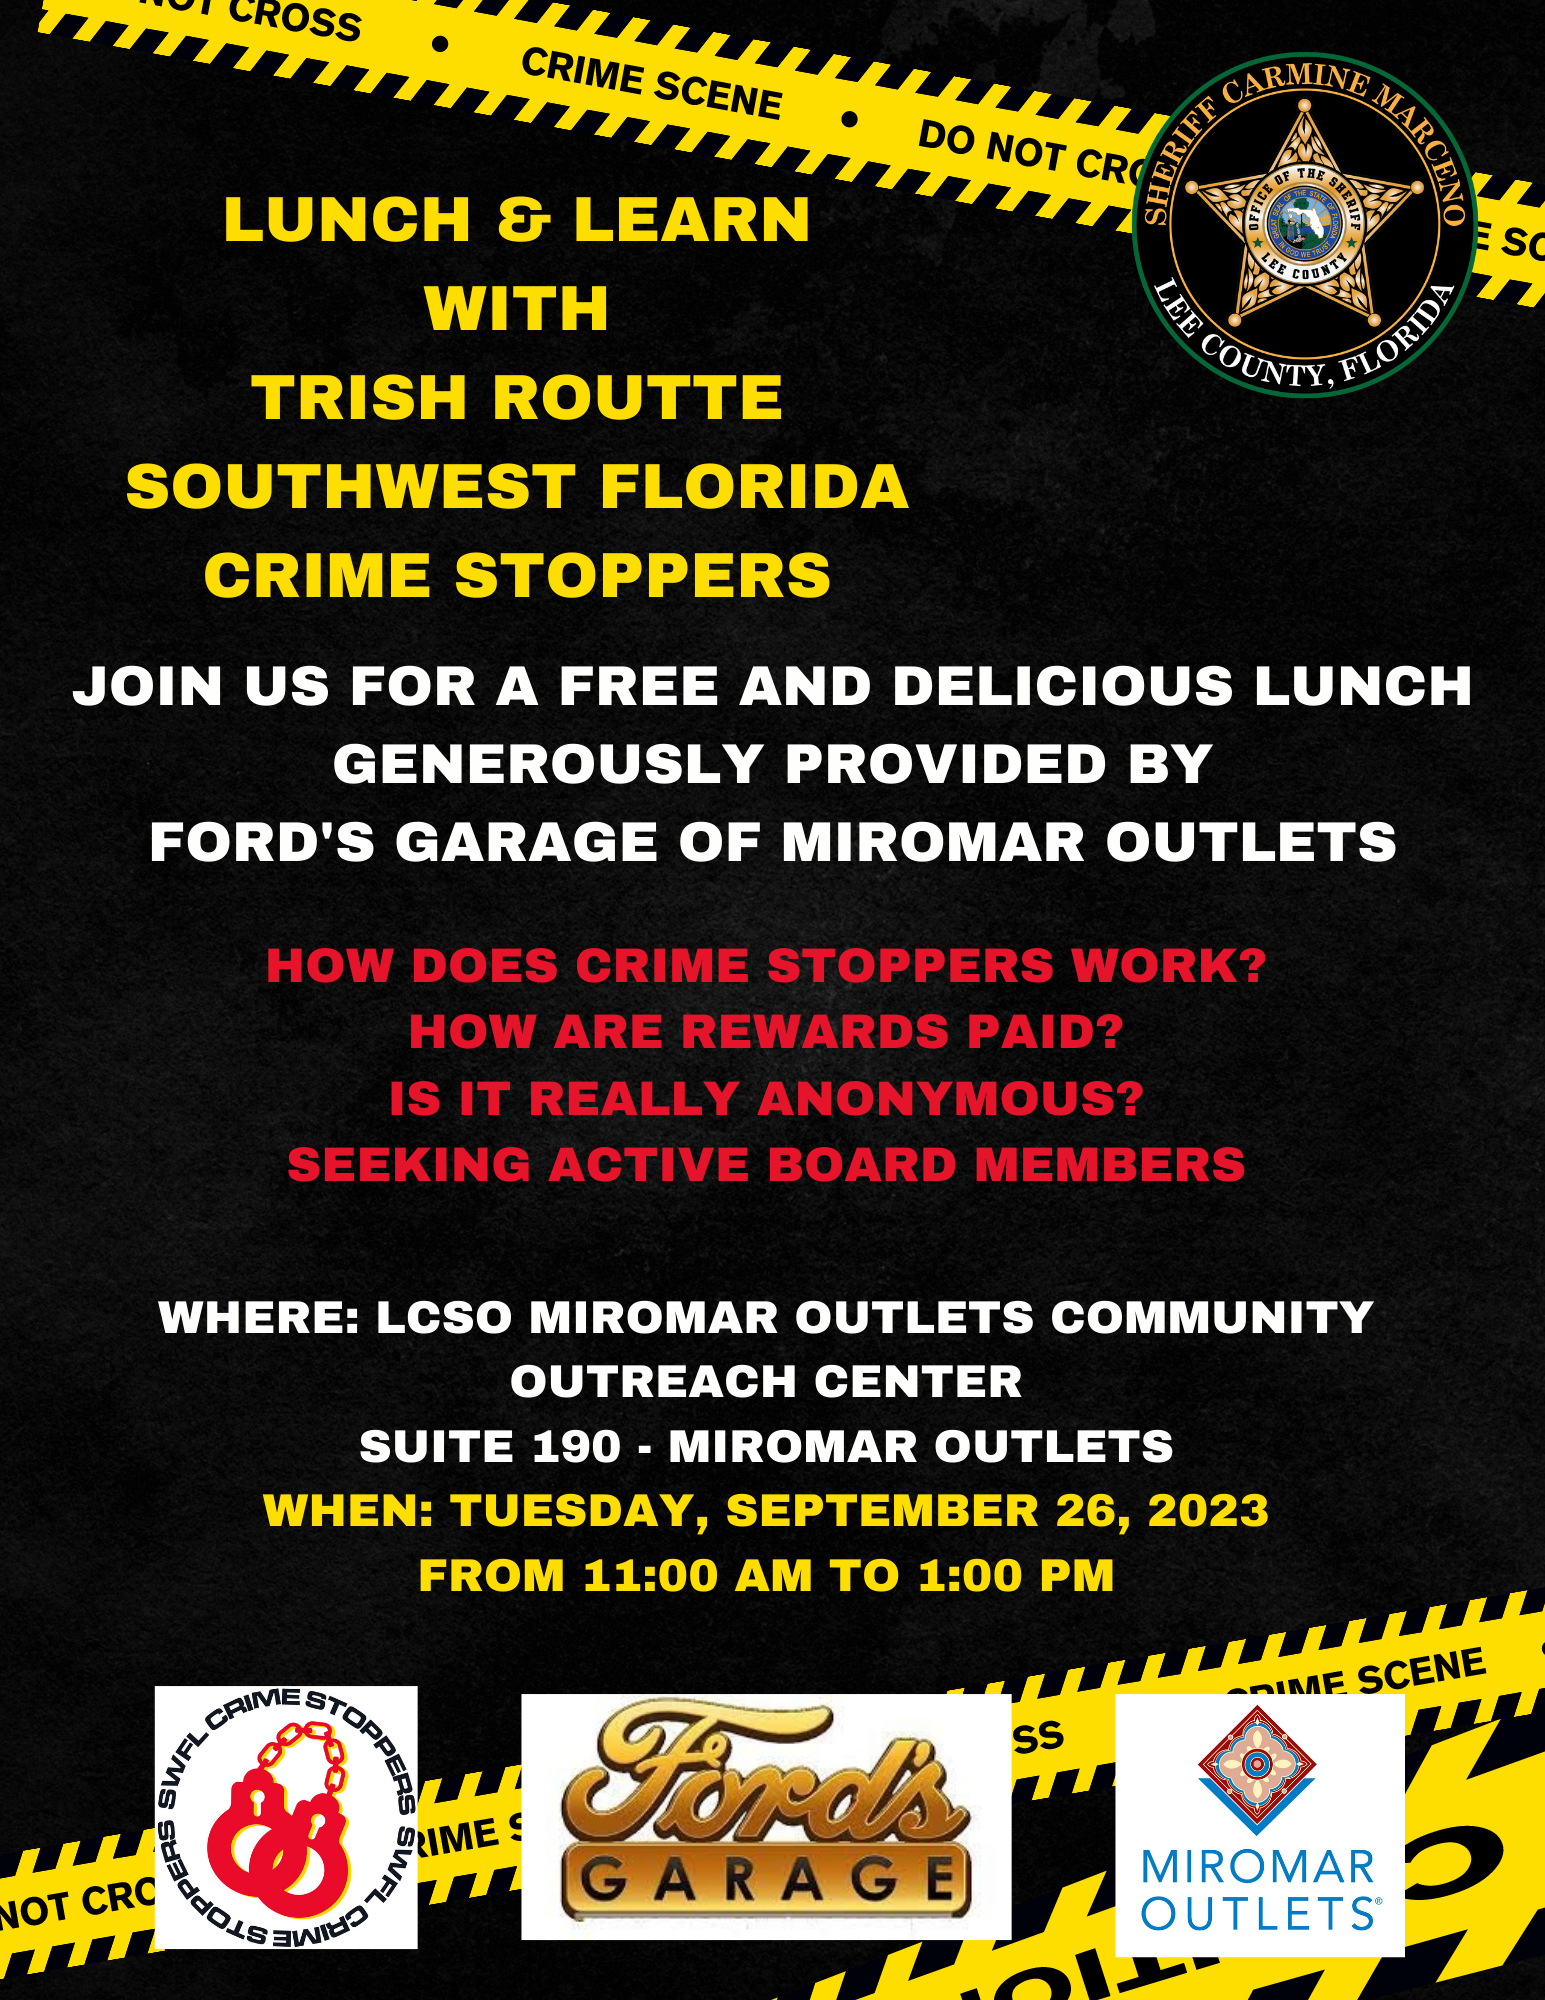 Lunch and learn with crimestoppers